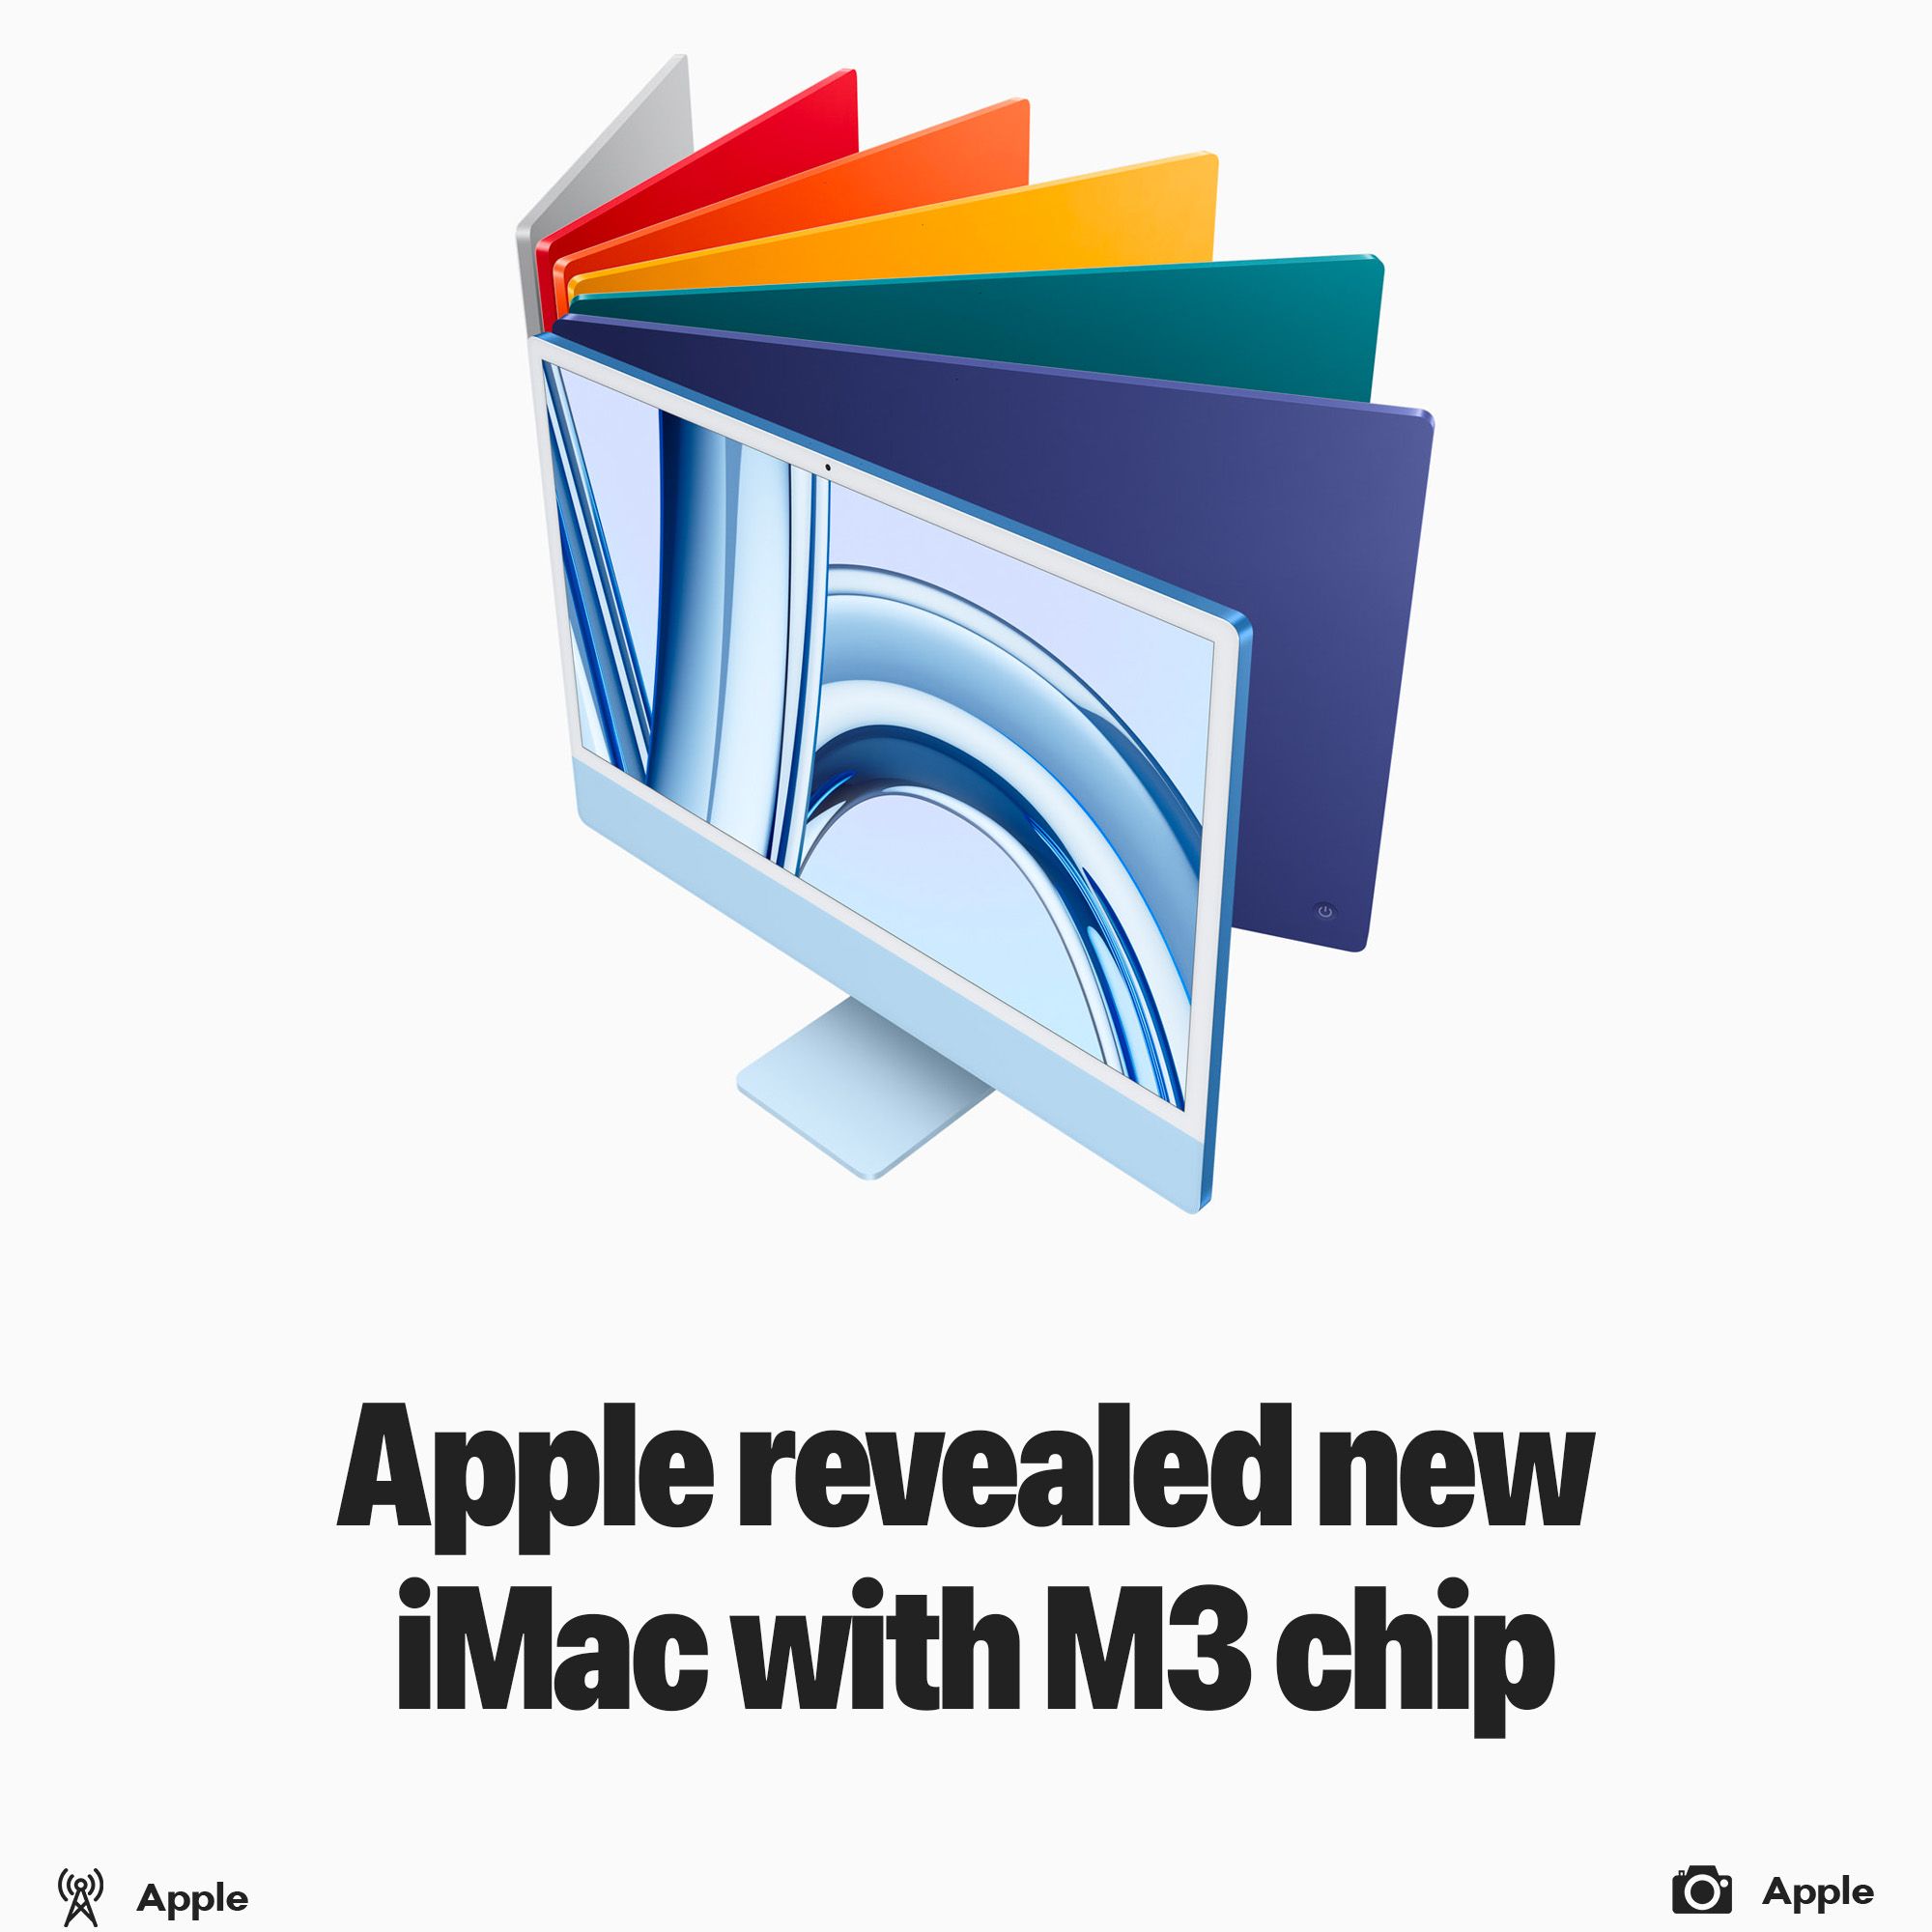 Apple revealed new iMac with M3 chip